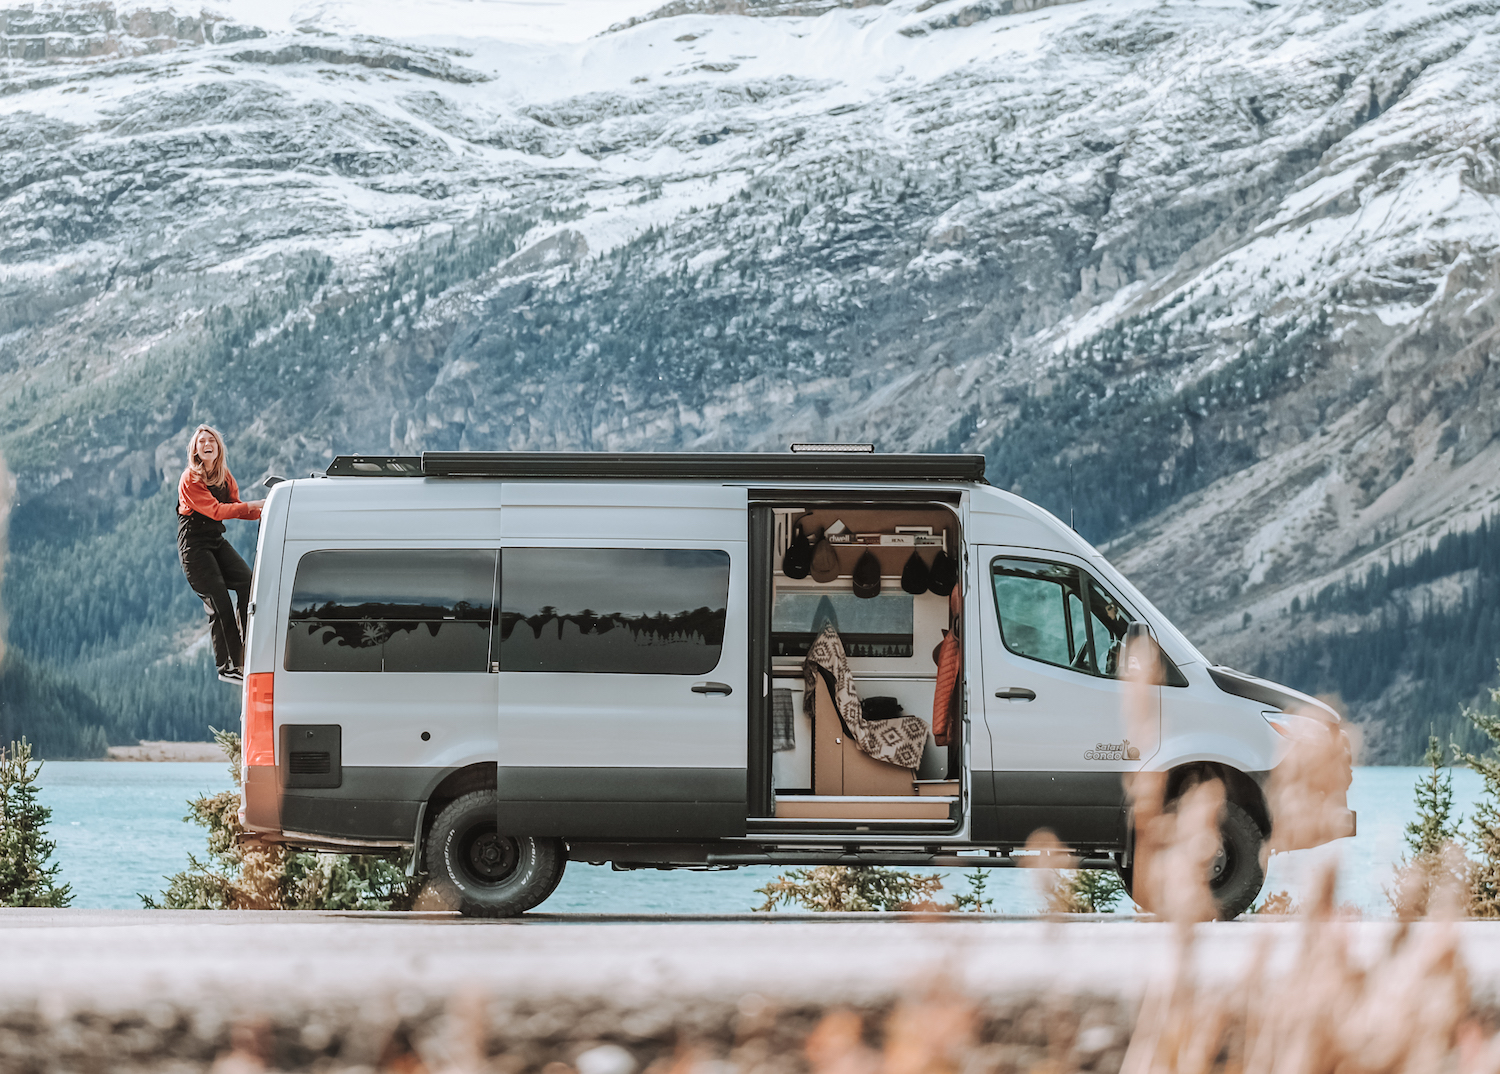 Gift ideas: 20 essential vanlife accessories for all budgets • Go-Van